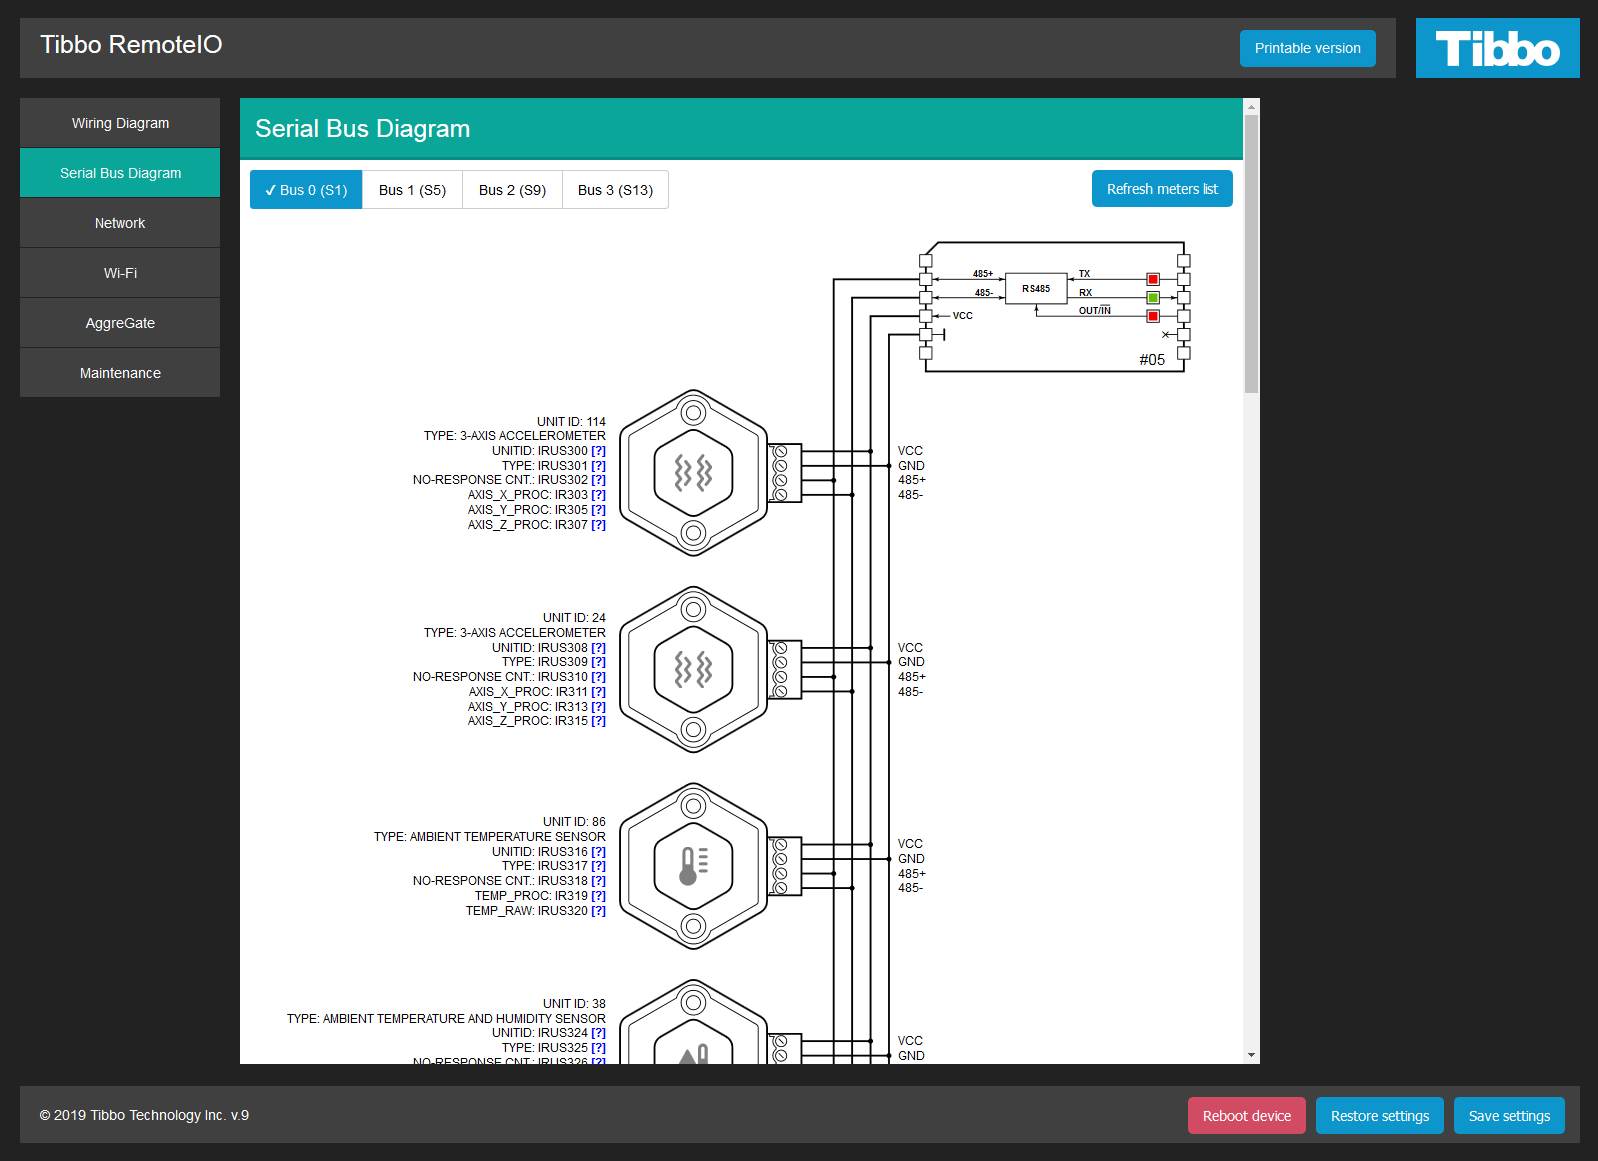 The Serial Bus Diagram displays RS485 ports and all Tibbo Bus Probes wired into them